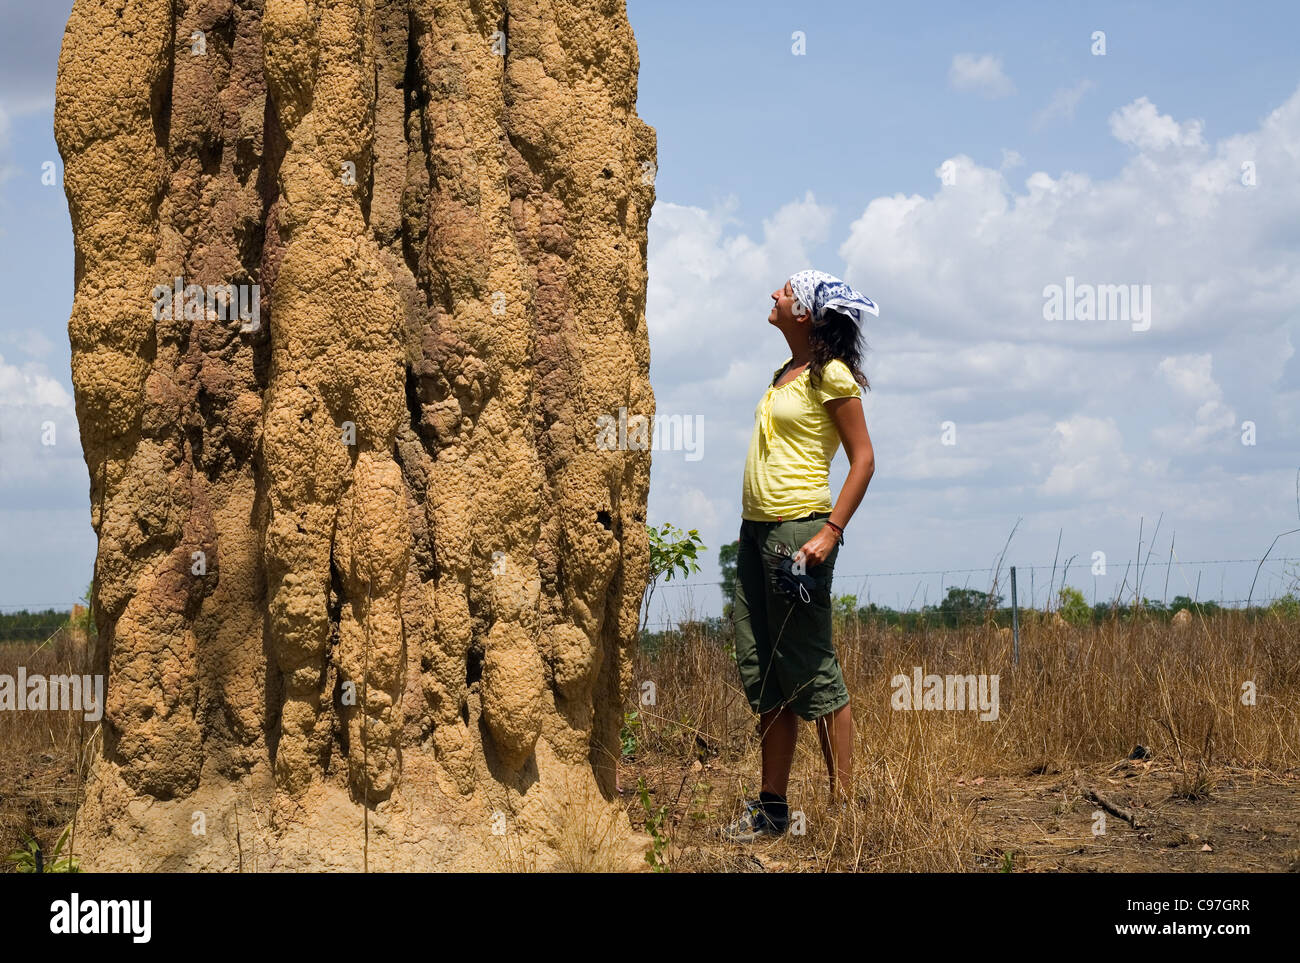 Woman standing next to a cathedral termite mound in Kakadu National Park, Northern Territory, Australia Stock Photo